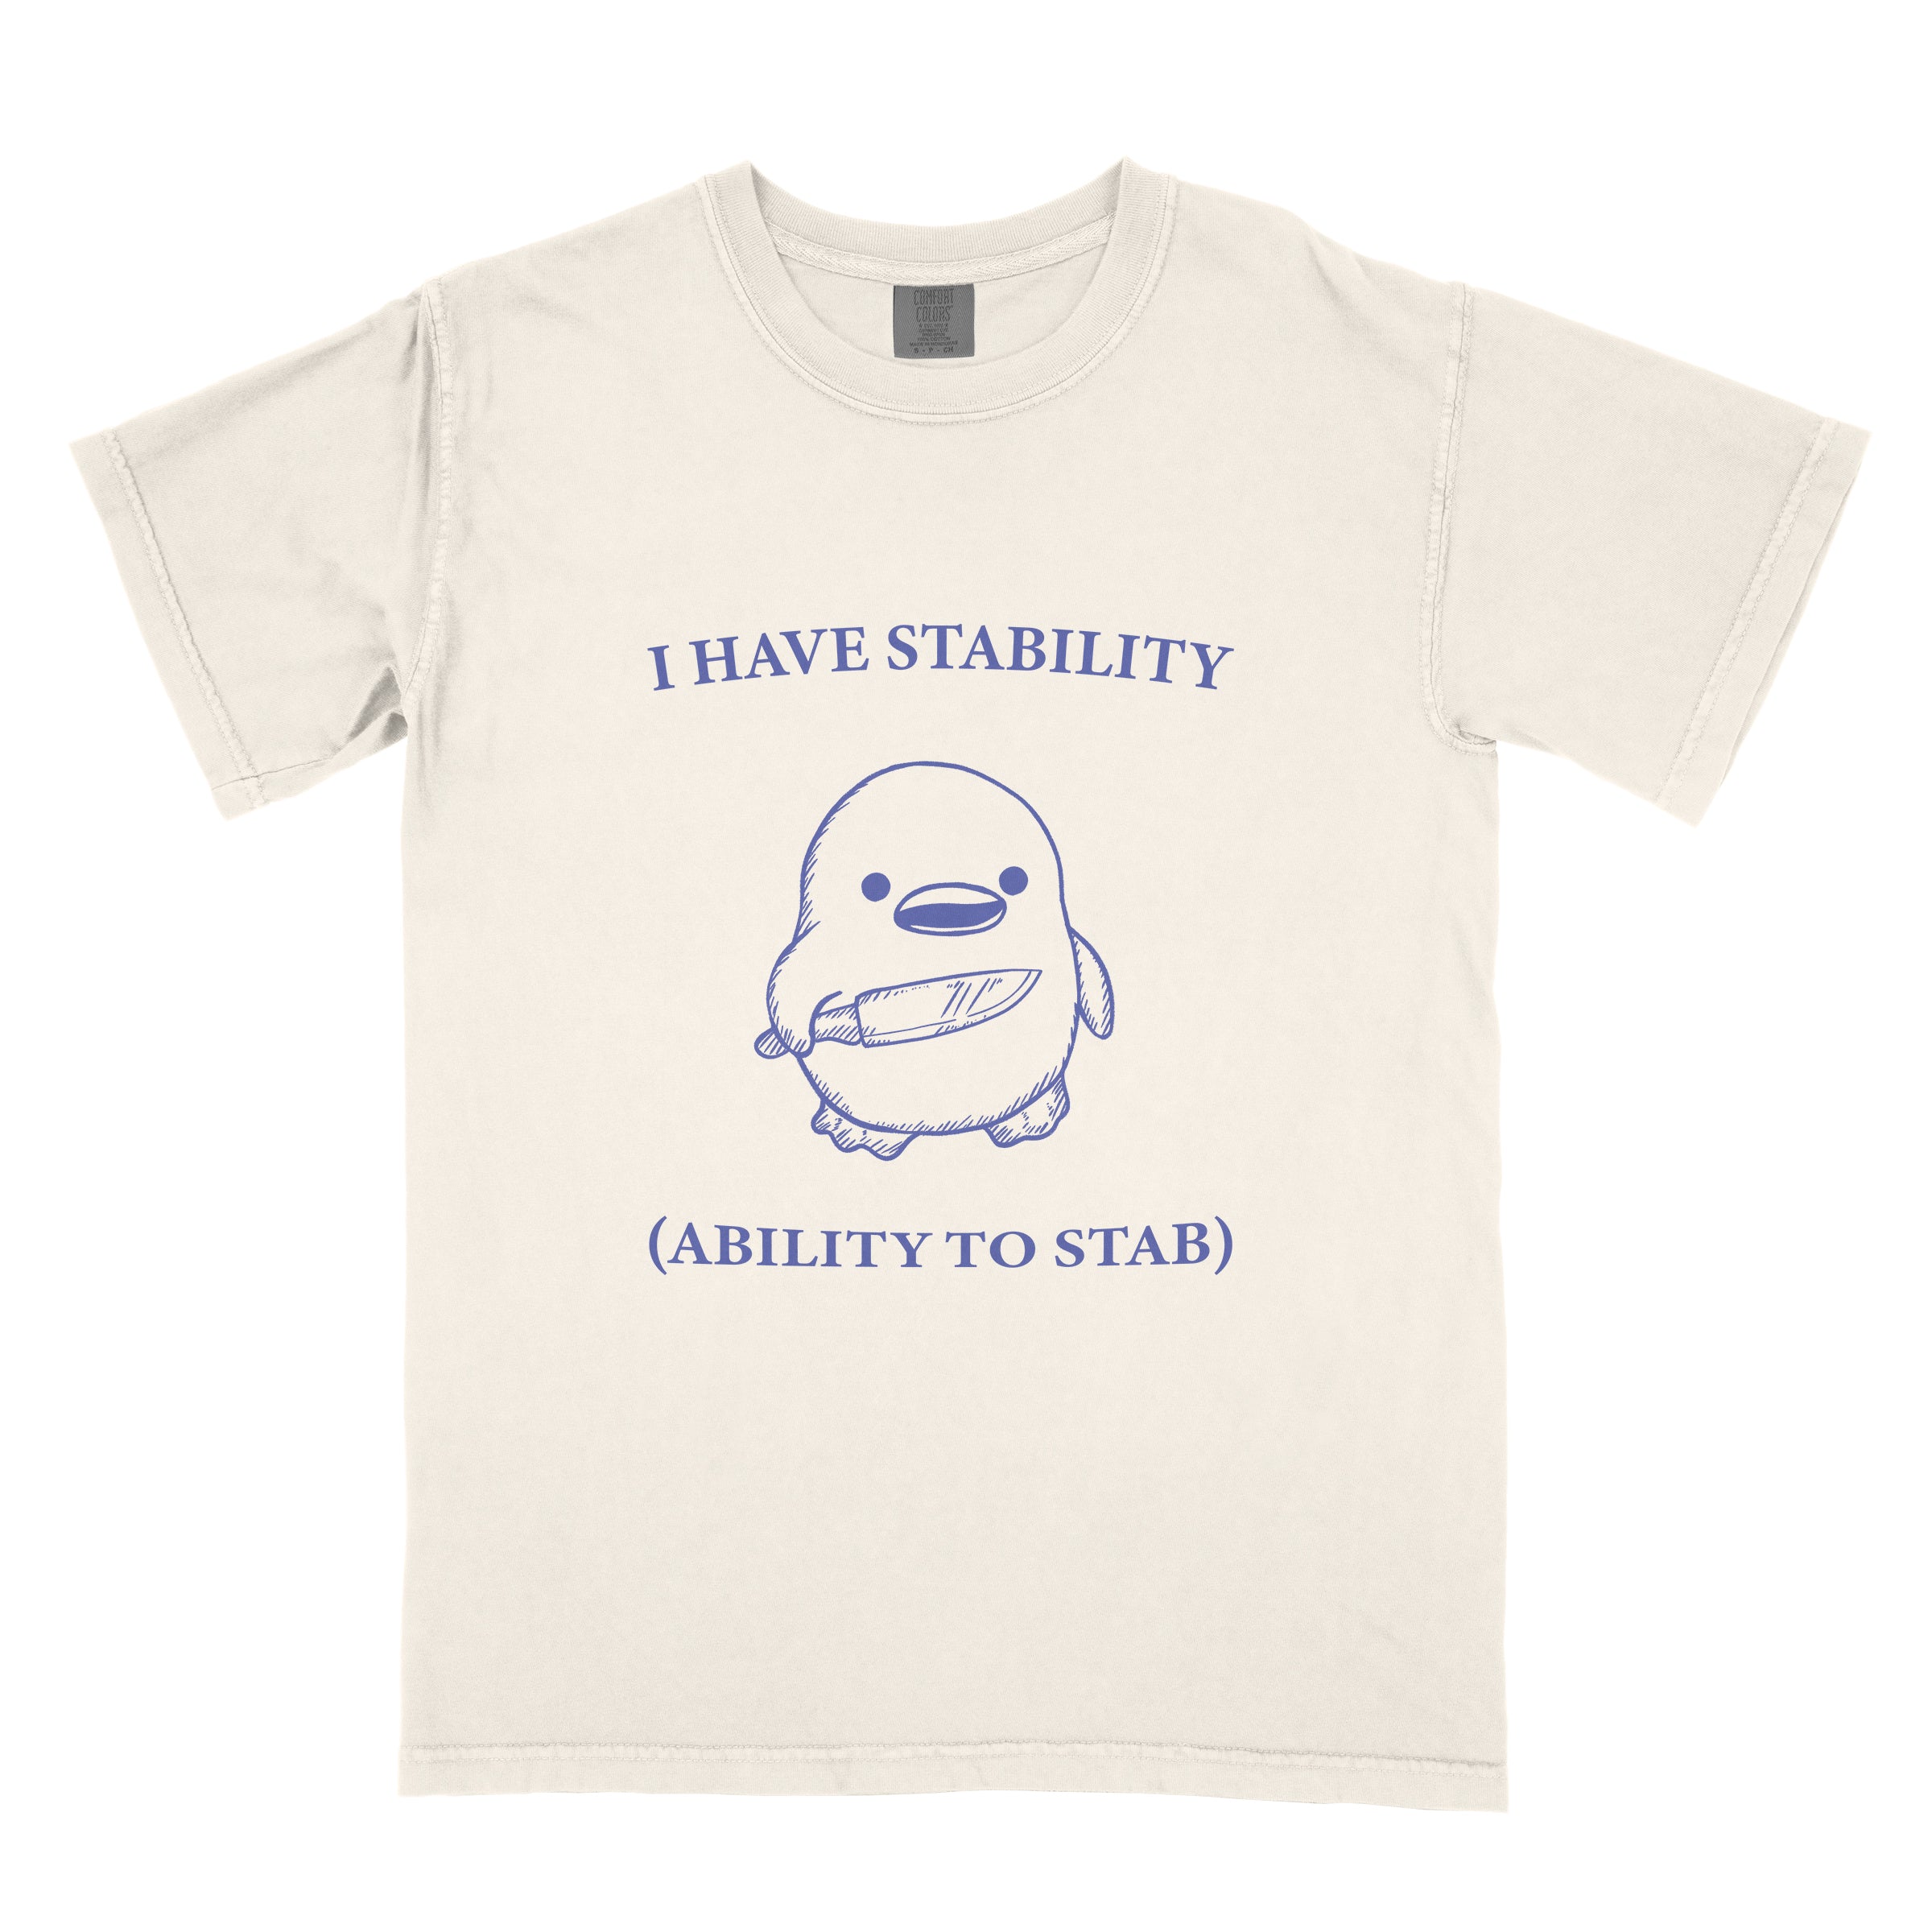 "I Have Stability" T-Shirt